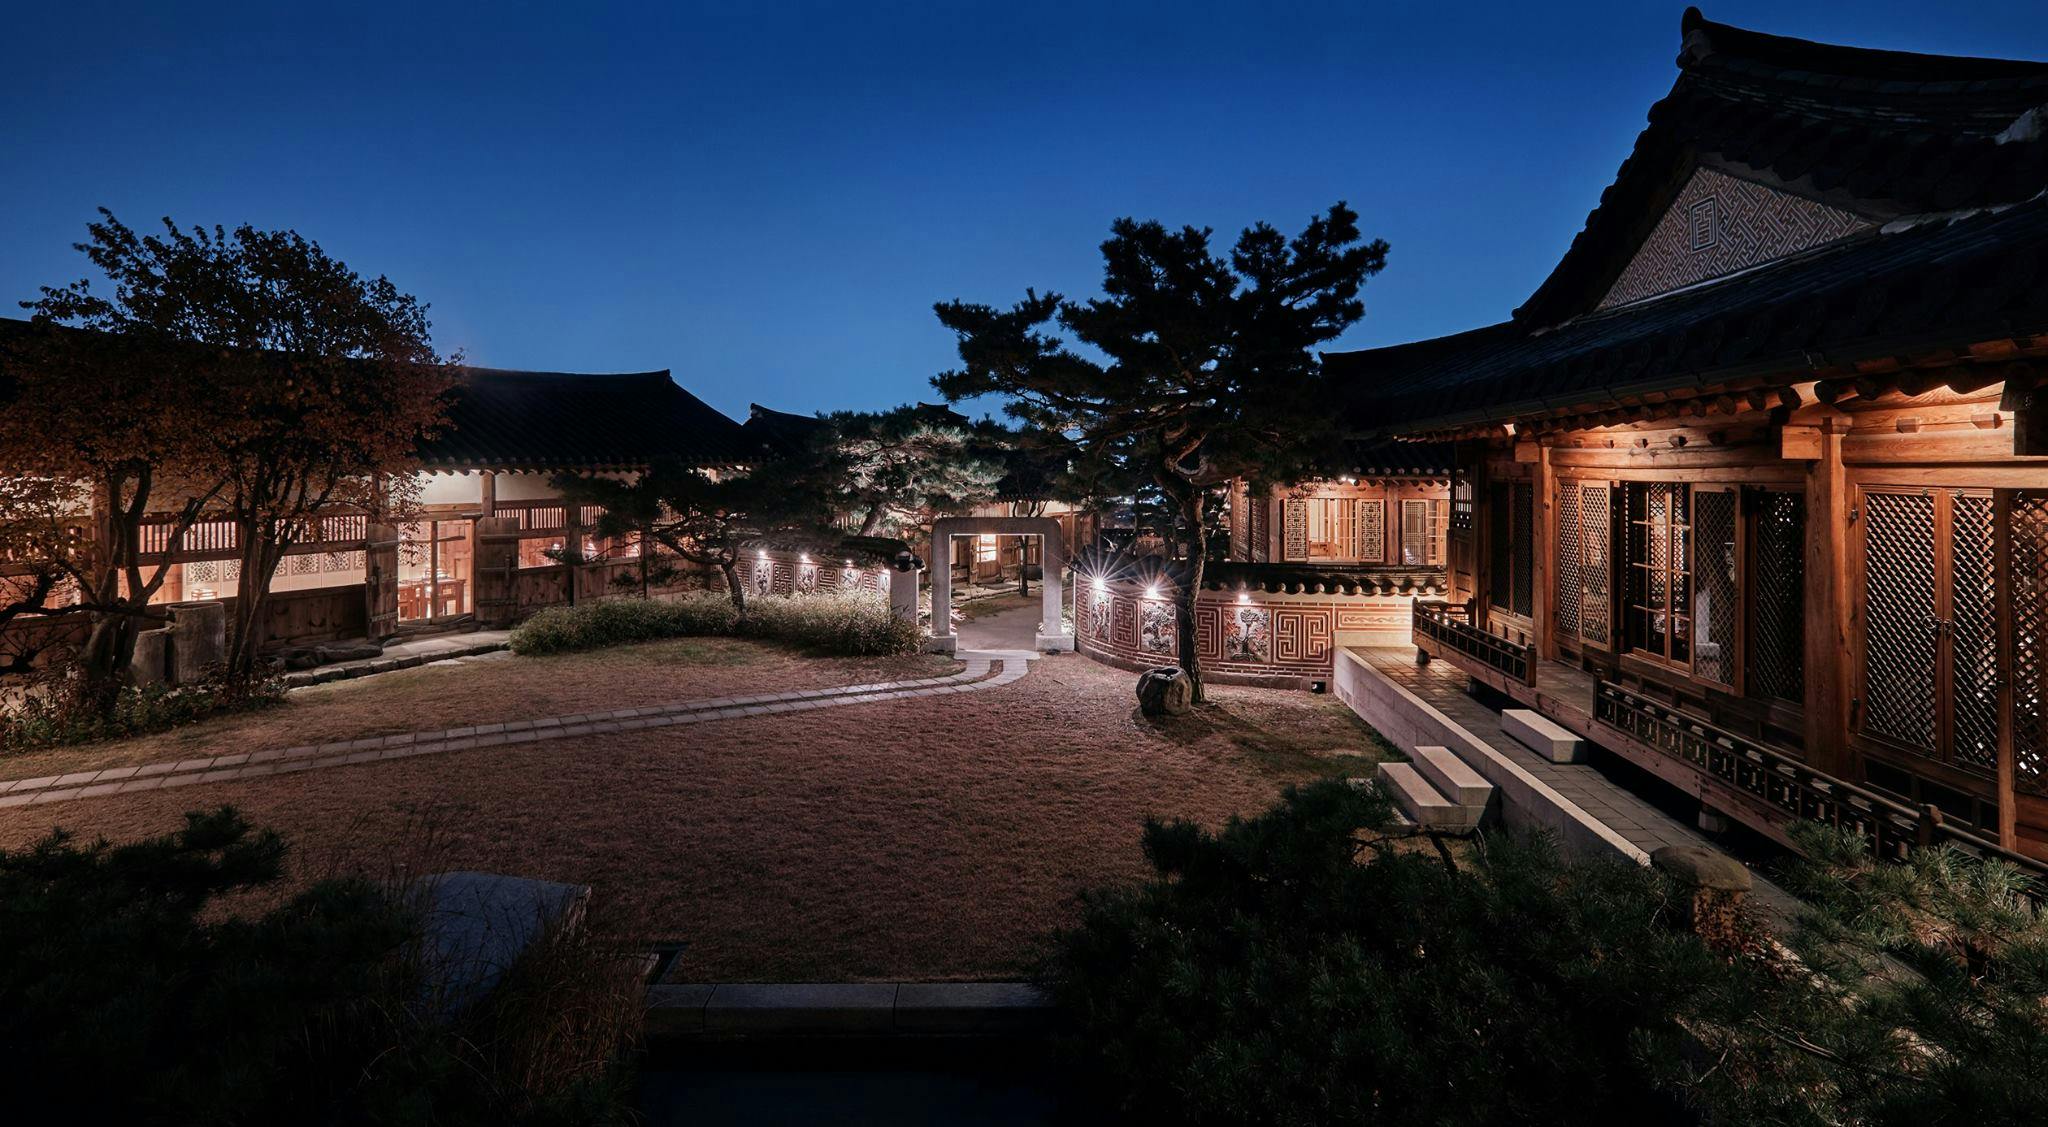 The courtyard of the Korean Furniture Museum by night